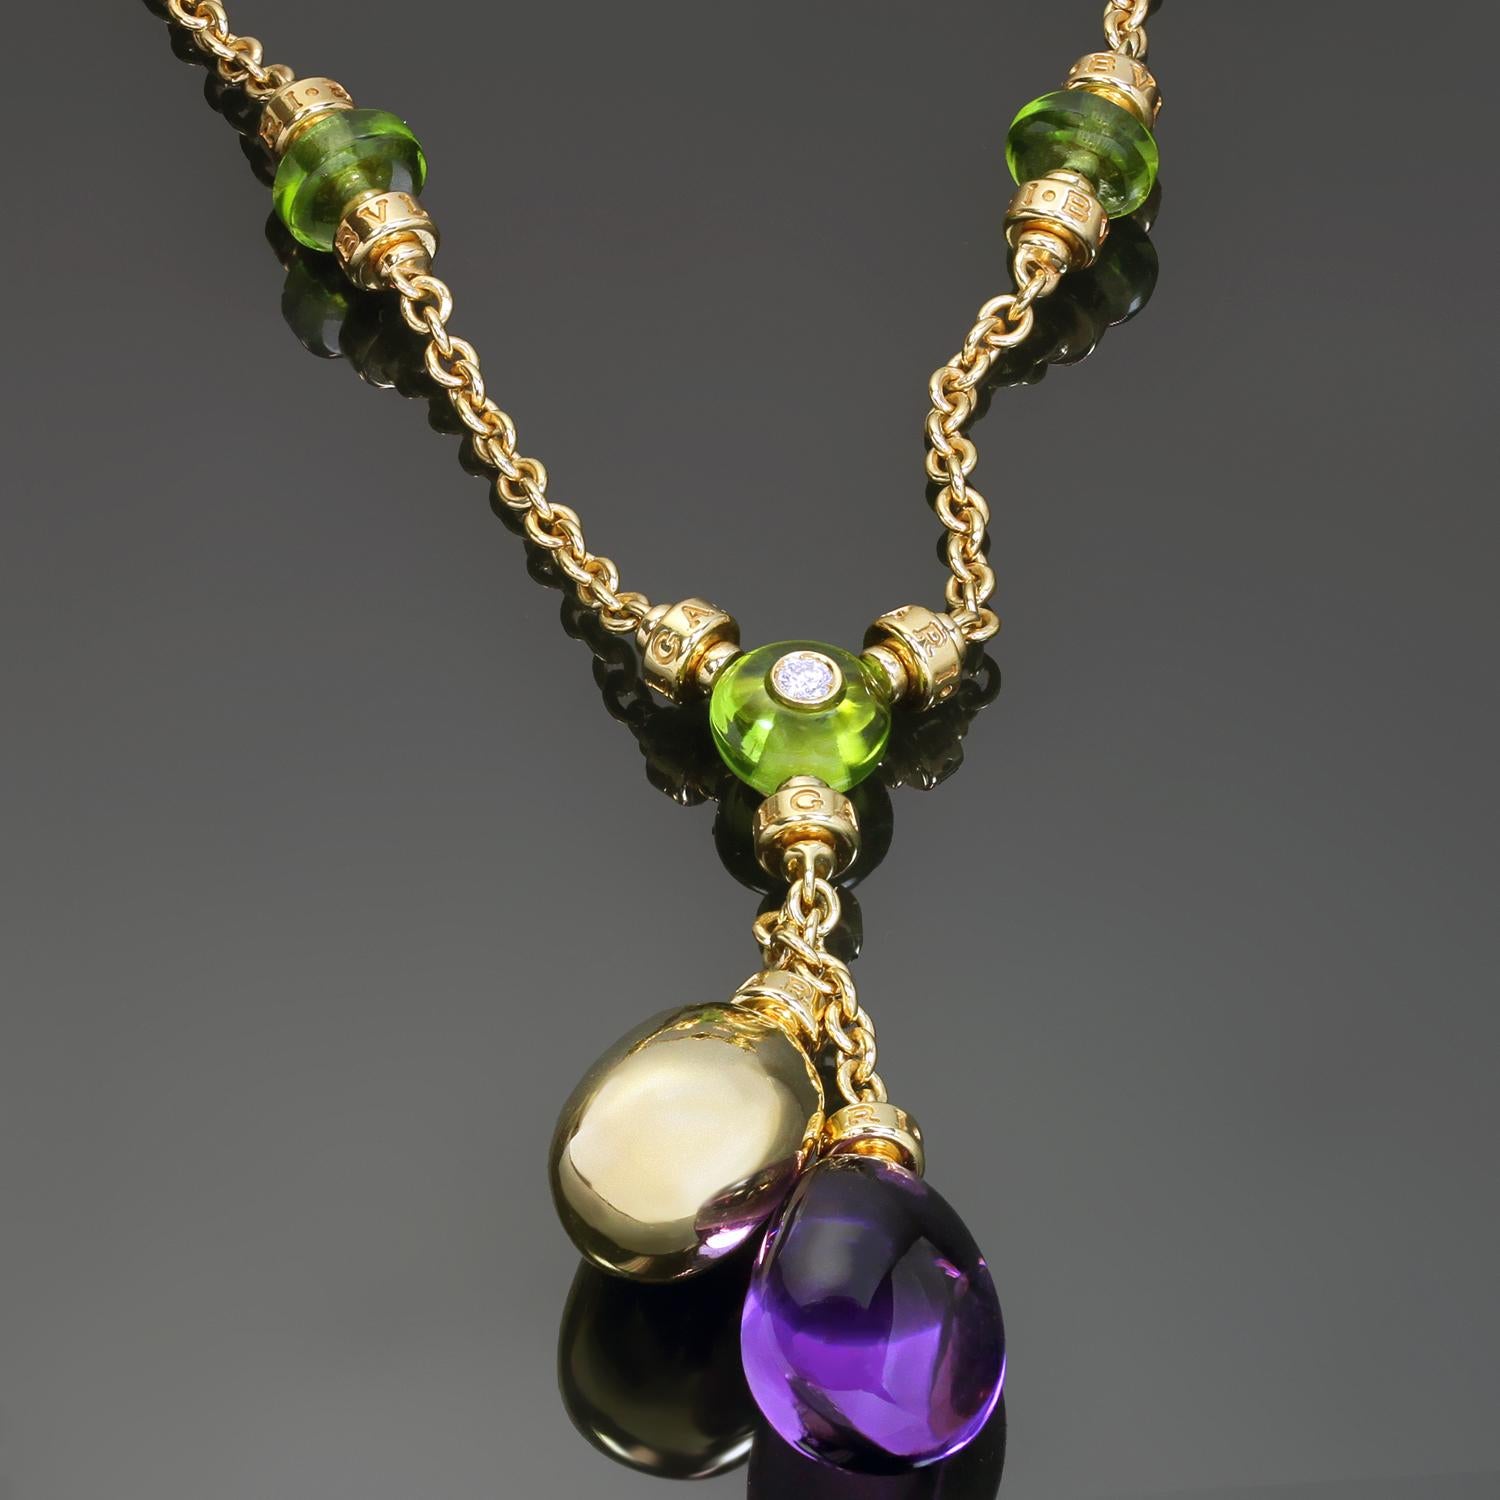 This gorgeous Bulgari necklace from the vibrant Mediterranean Eden collection is crafted in 18k yellow gold and features a pendant centered with a cabochon peridot and a brilliant-cut round E-F VVS1-VVS2 diamond weighing an estimated 0.10 carats,